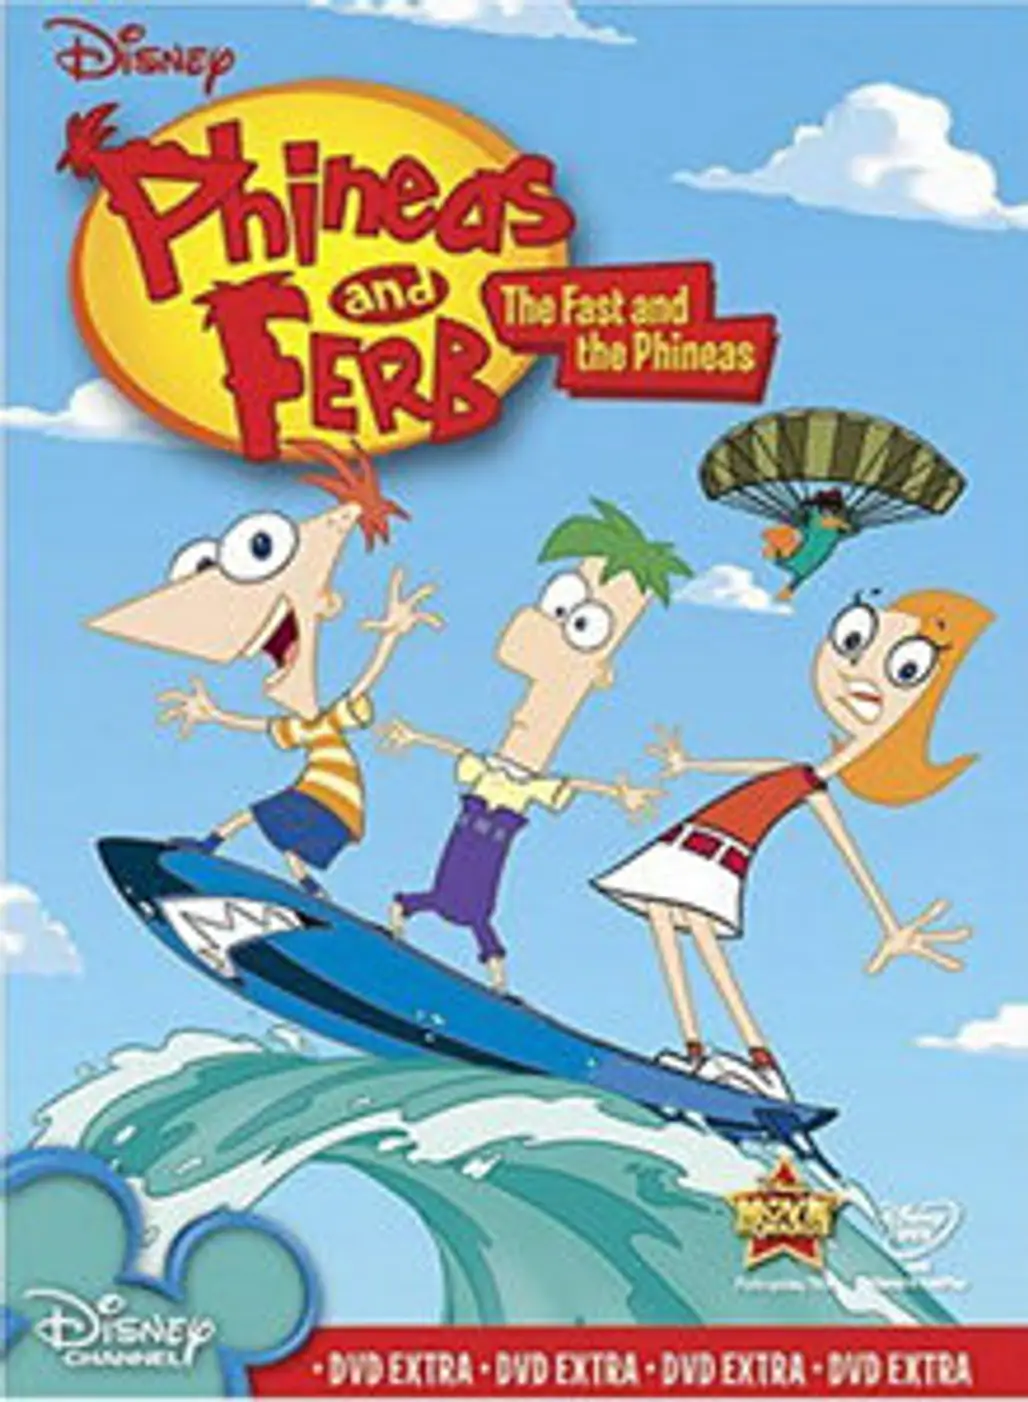 Anything Related to Disney’s “Phineas and Ferb”